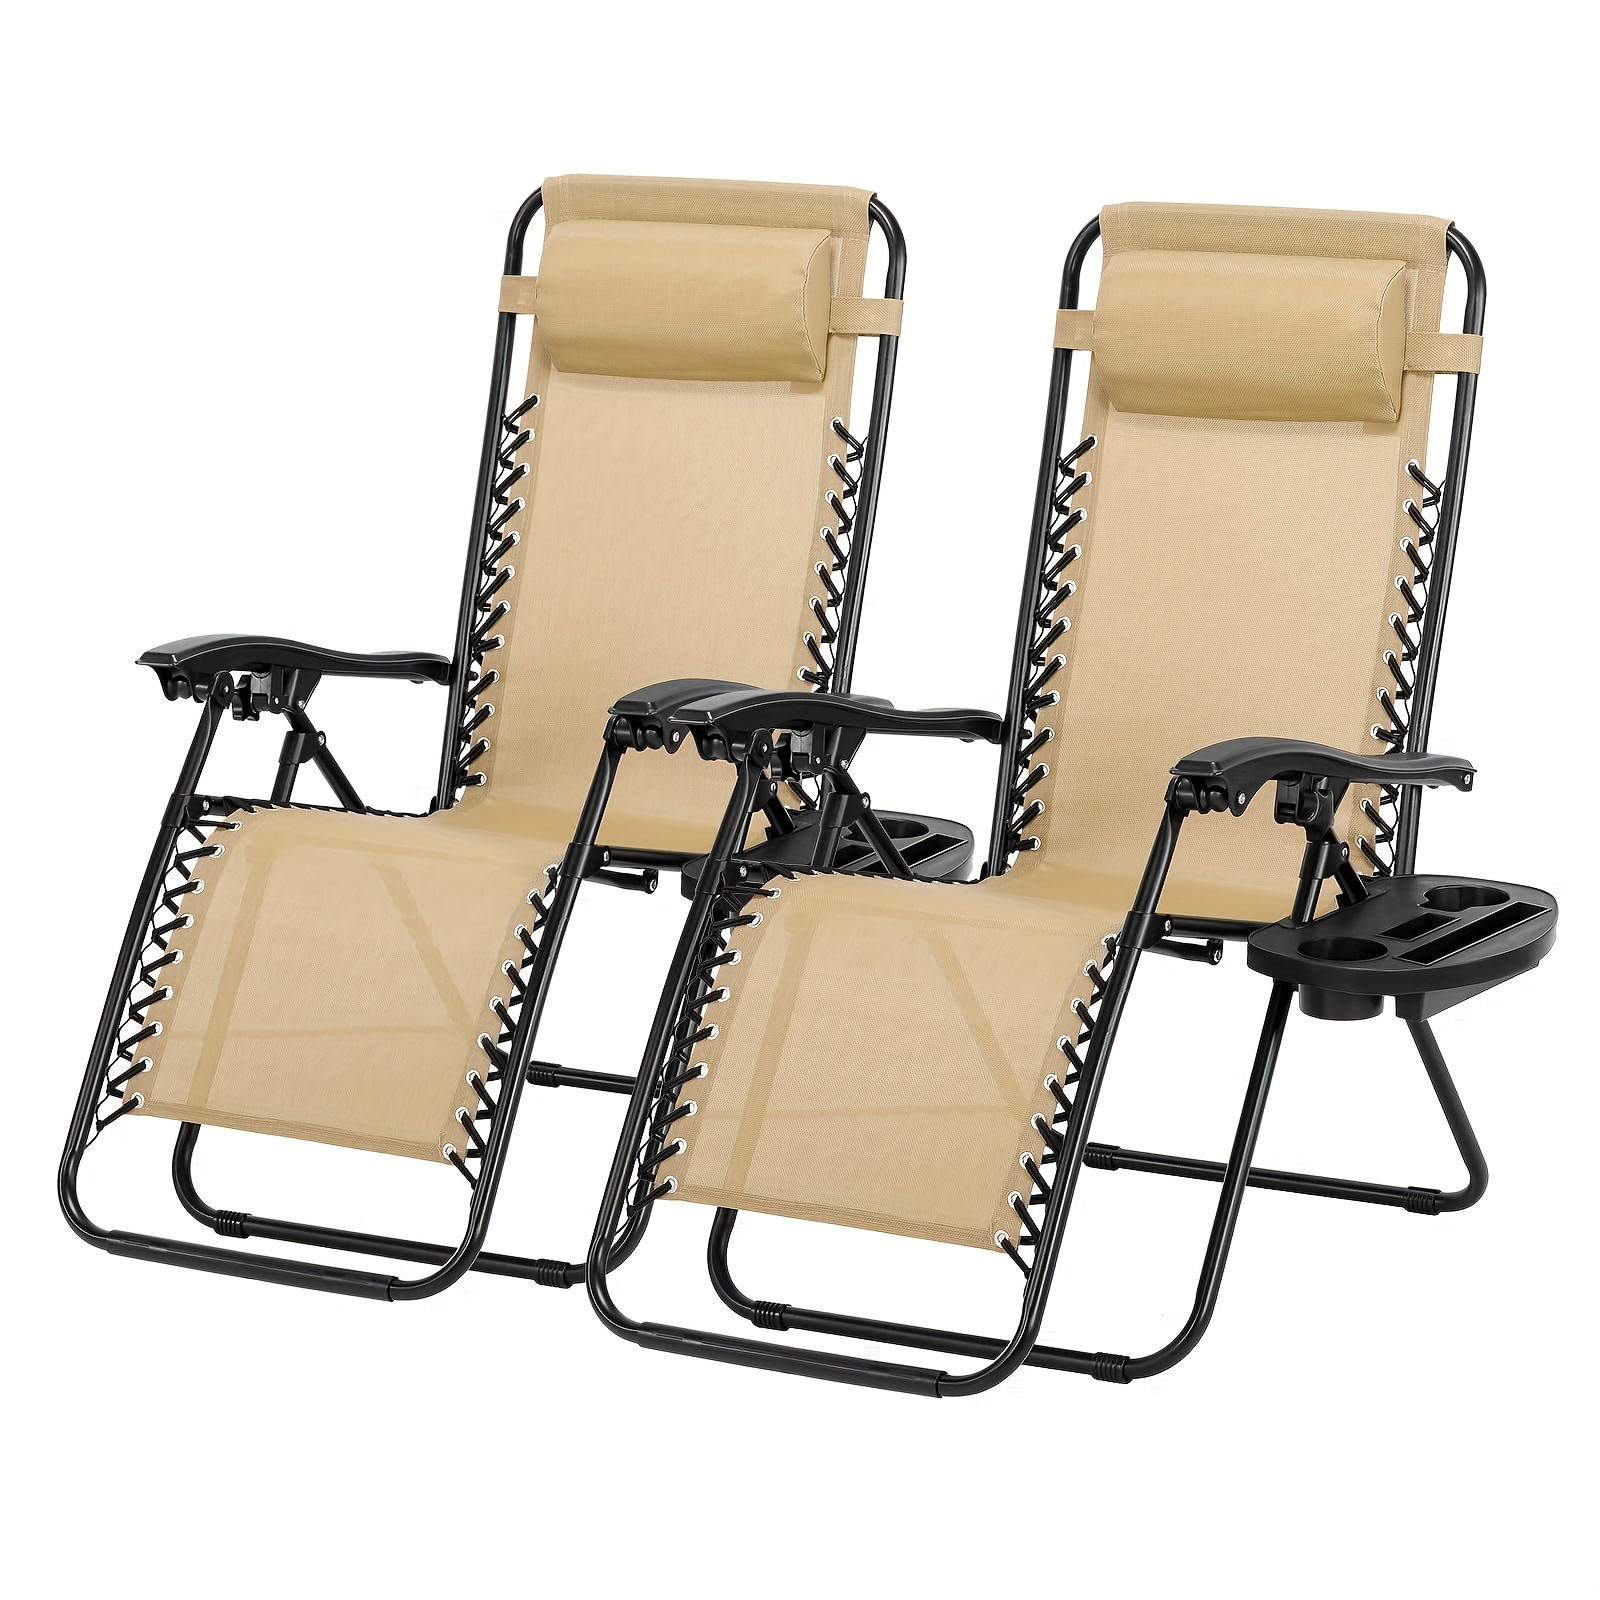 

Gecheer Set Of 2 Adjustable Steel Mesh 0 Gravity Lounge Chair Recliners W/pillows And Cup Holder Trays, Khaki